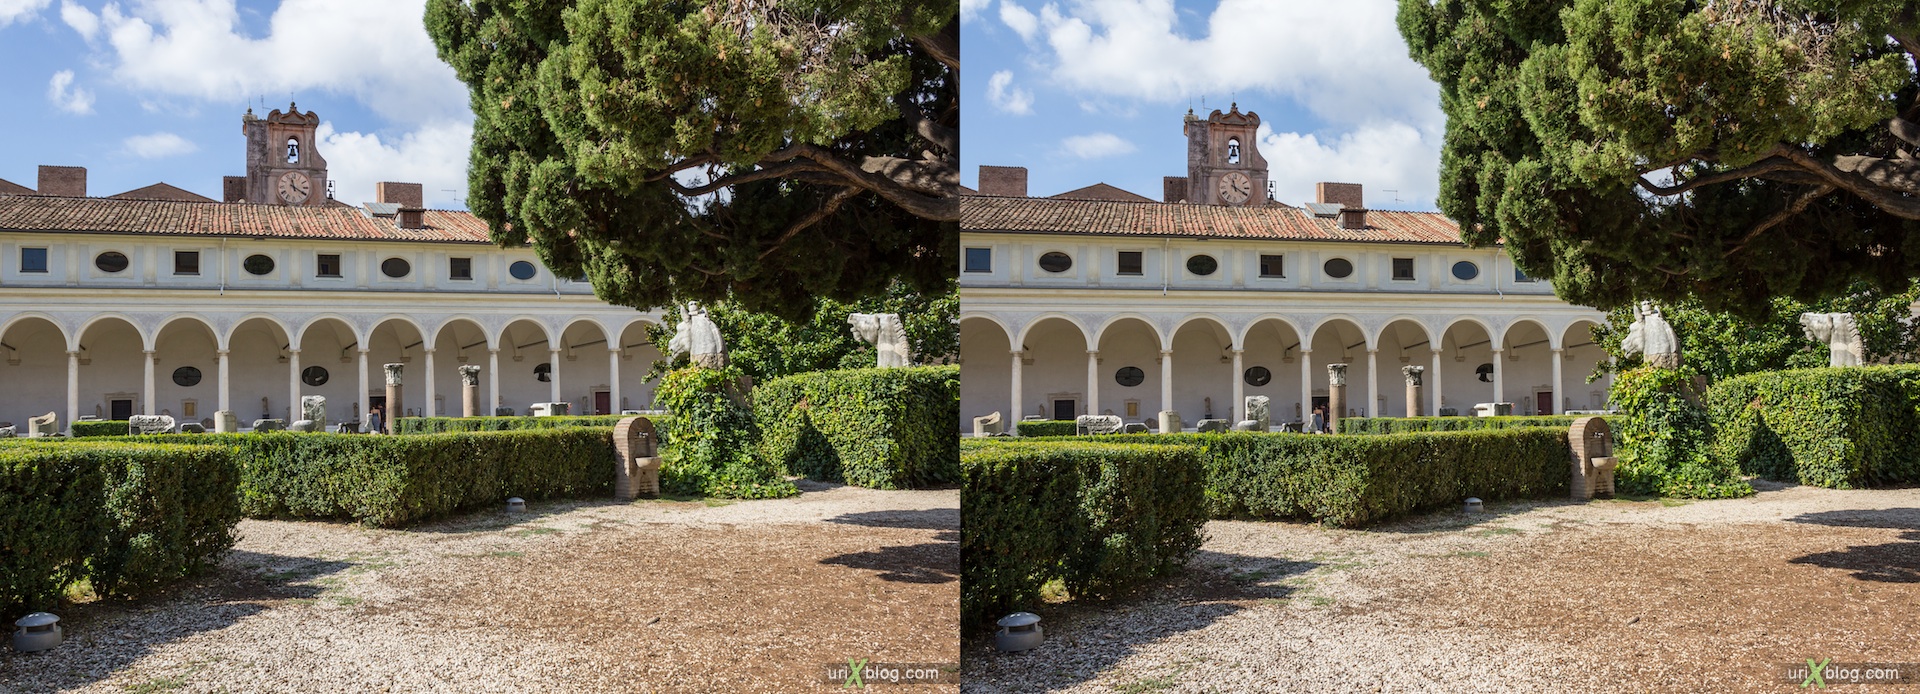 2012, courtyard, National Museum of Rome, Diocletian Baths, Rome, Italy, Europe, 3D, stereo pair, cross-eyed, crossview, cross view stereo pair